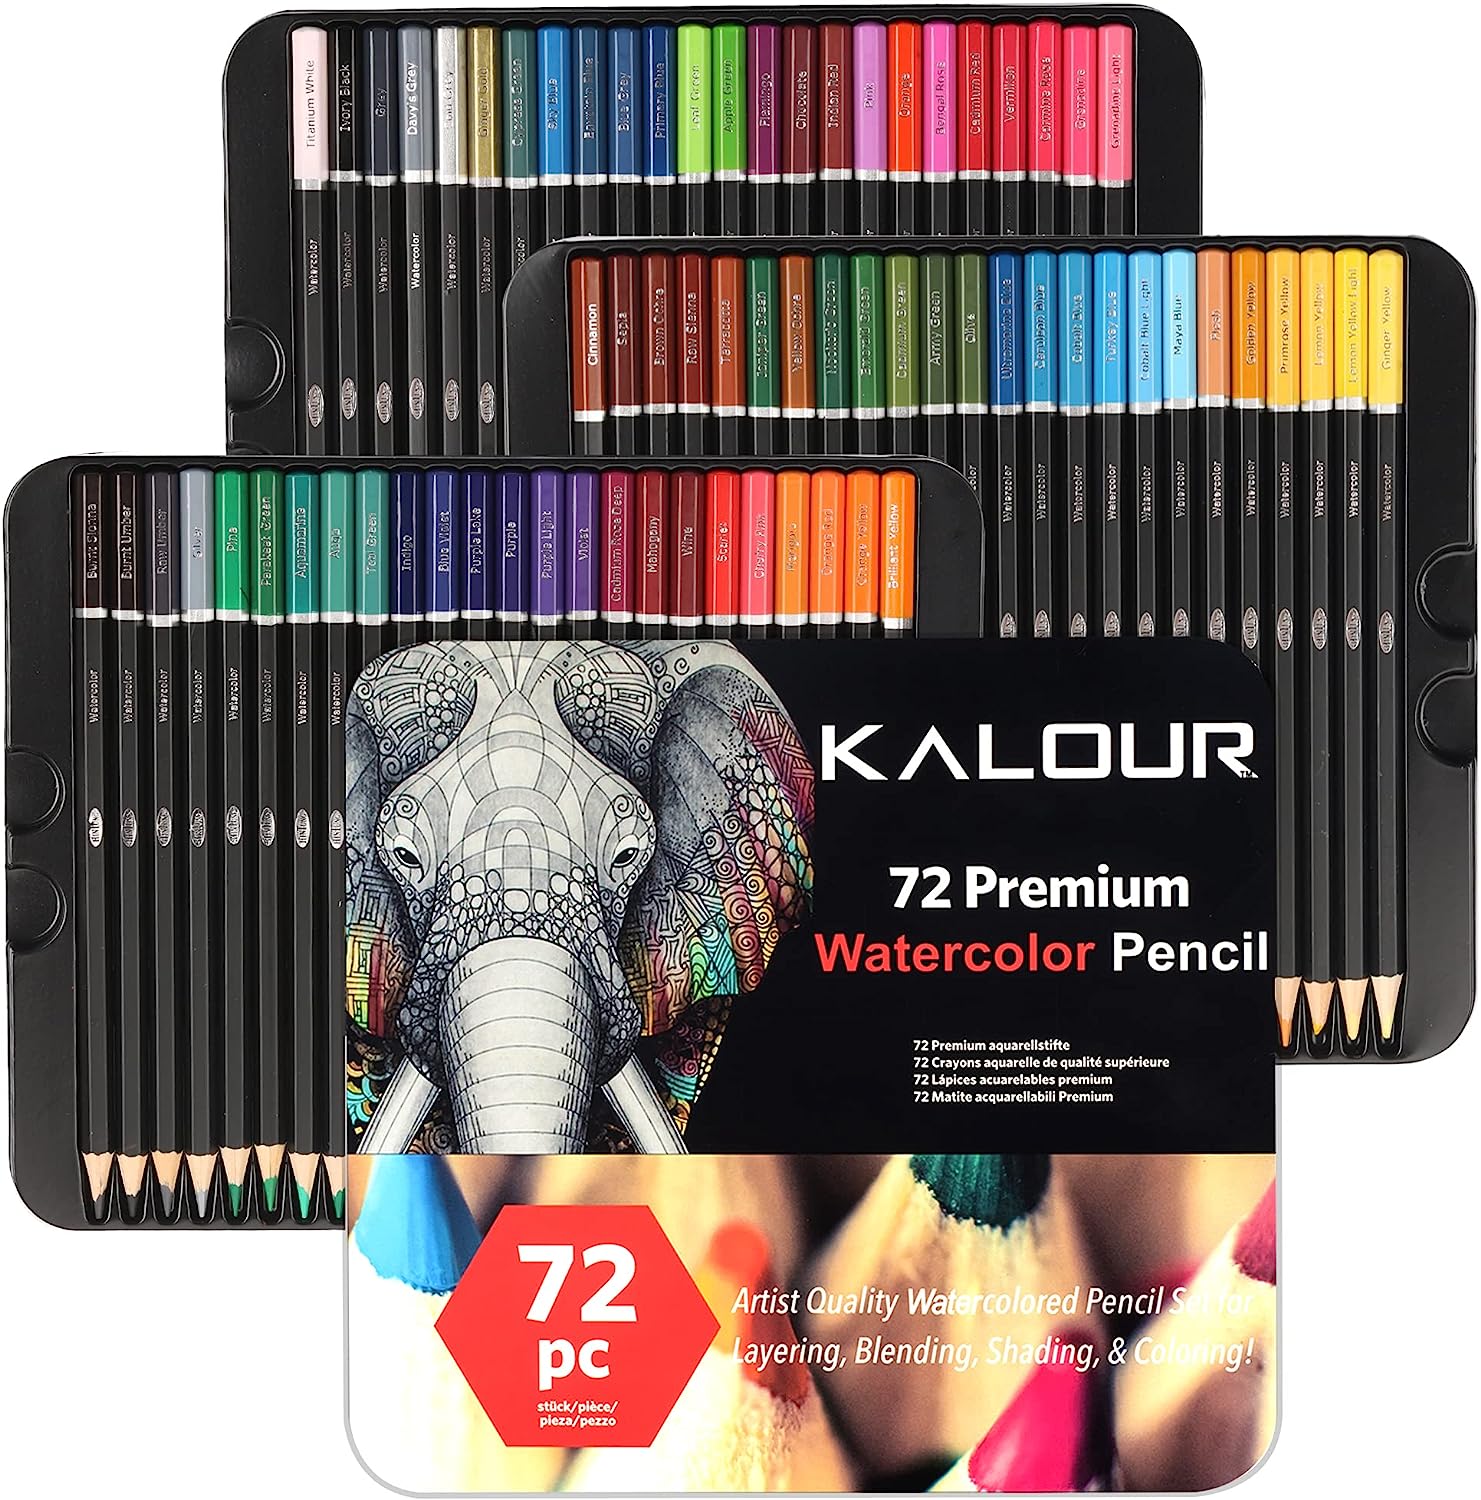 KALOUR Watercolor Pencils - Professional Set of 72 - Beautiful Blending Effects with Wet or Dry - Ideal for Coloring Book - Water Soluble Pencils